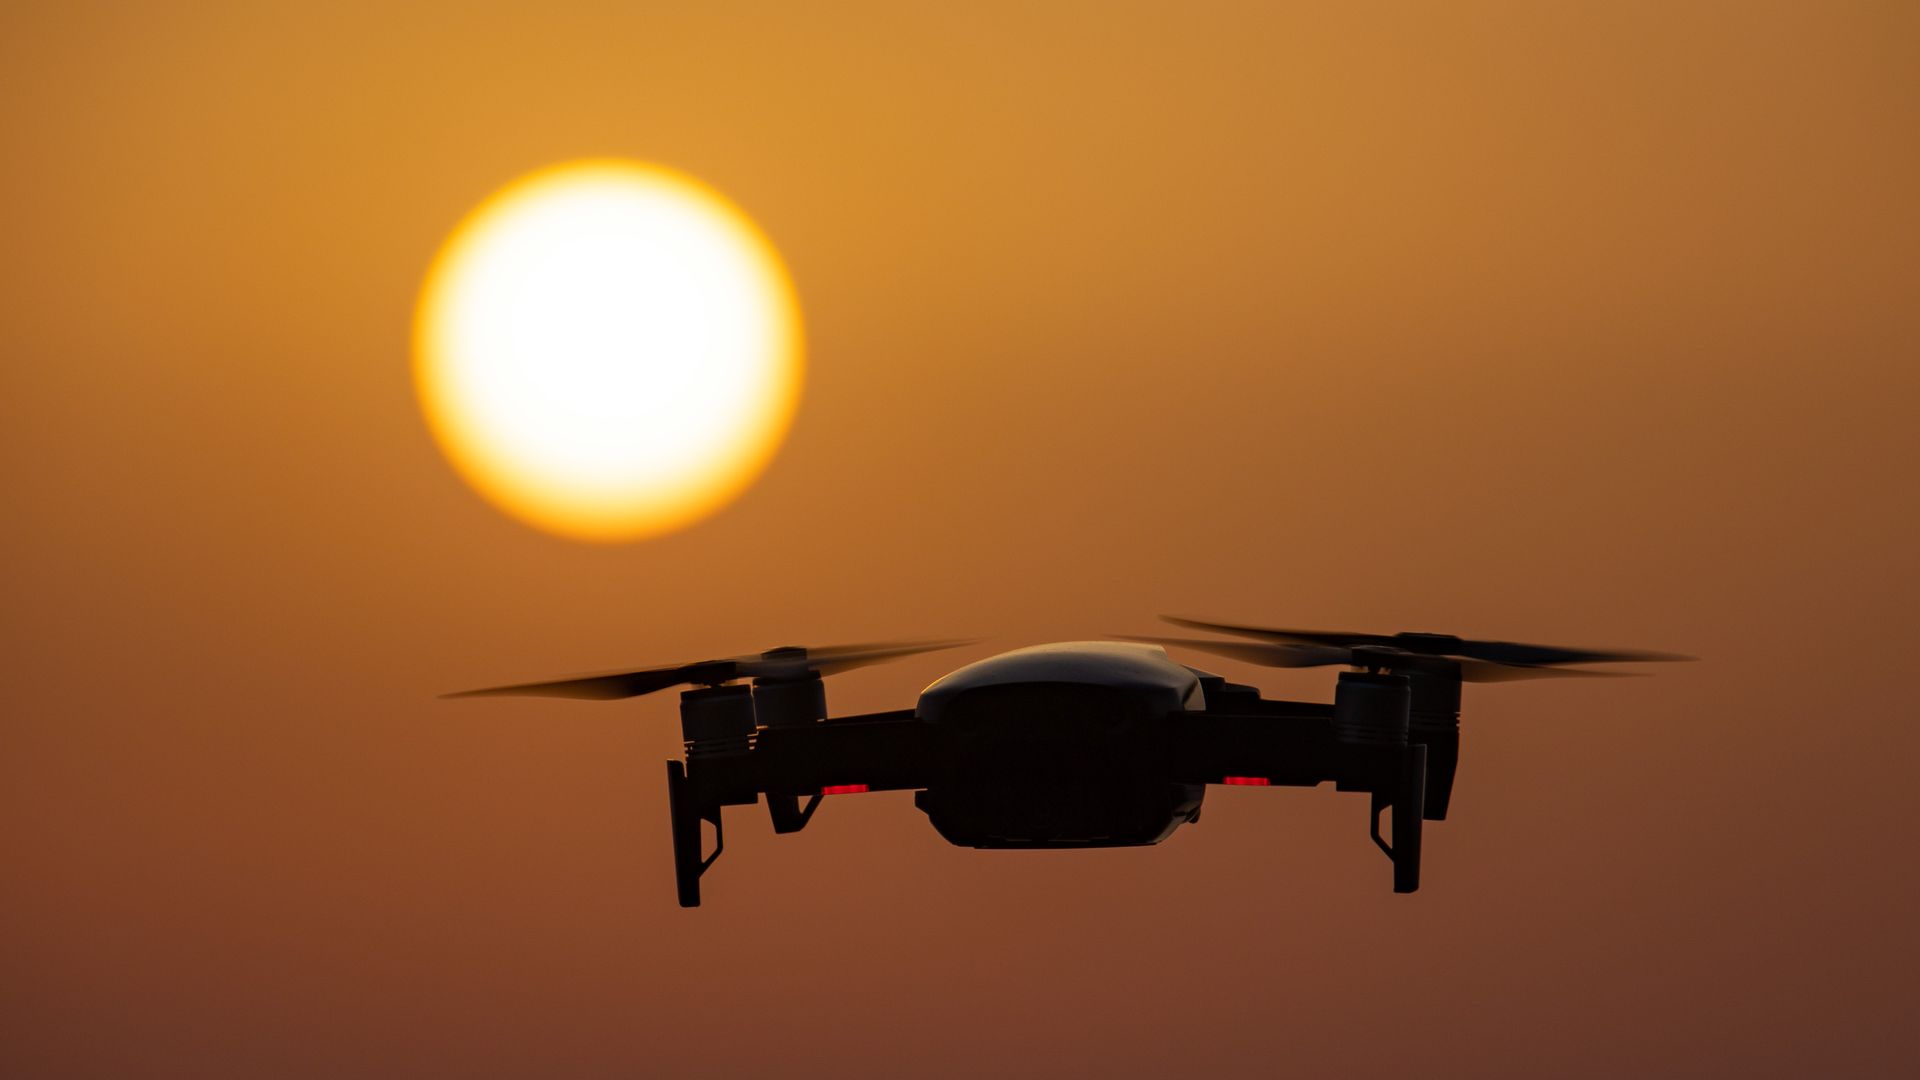 A DJI drone is seen hovering in front of a setting sun.